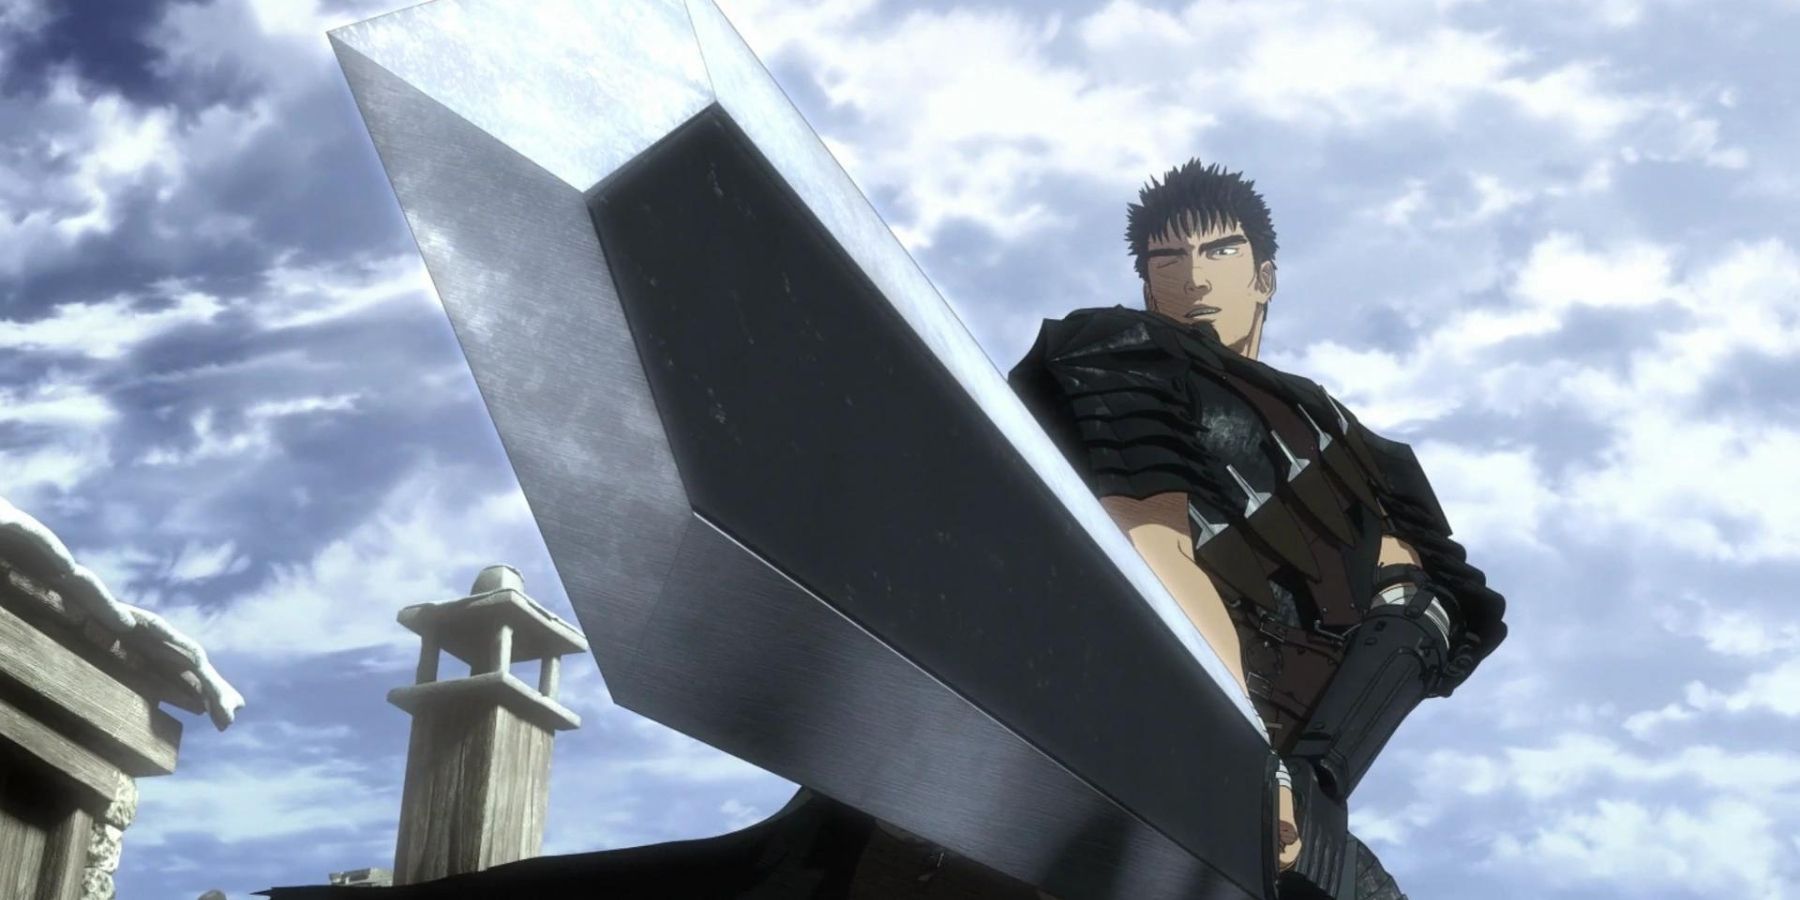 How to make The Dragon Slayer! Guts' Weapon from Berserk! 